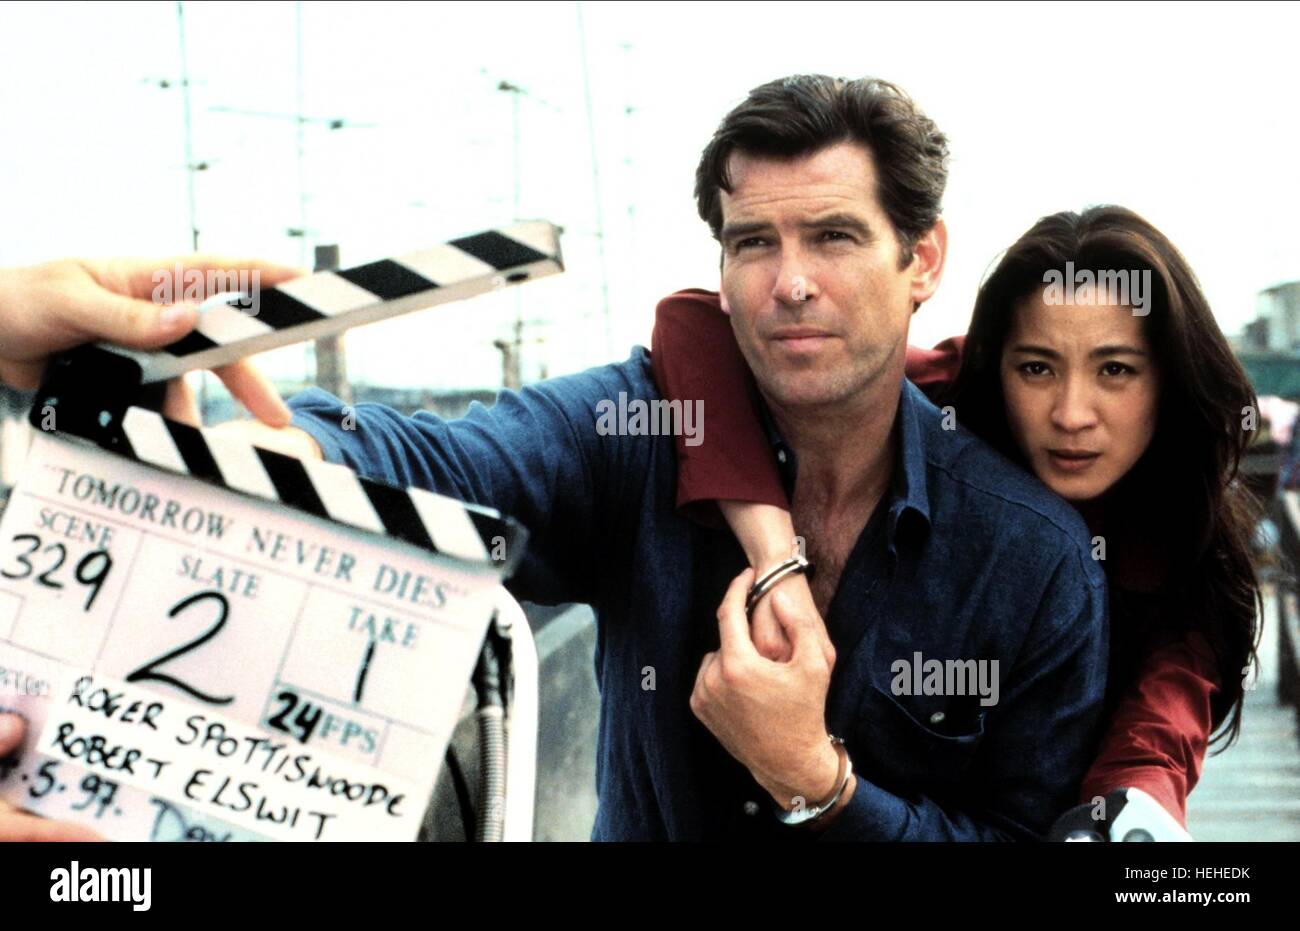 Michelle Yeoh Tomorrow Never Dies High Resolution Stock Photography and ...